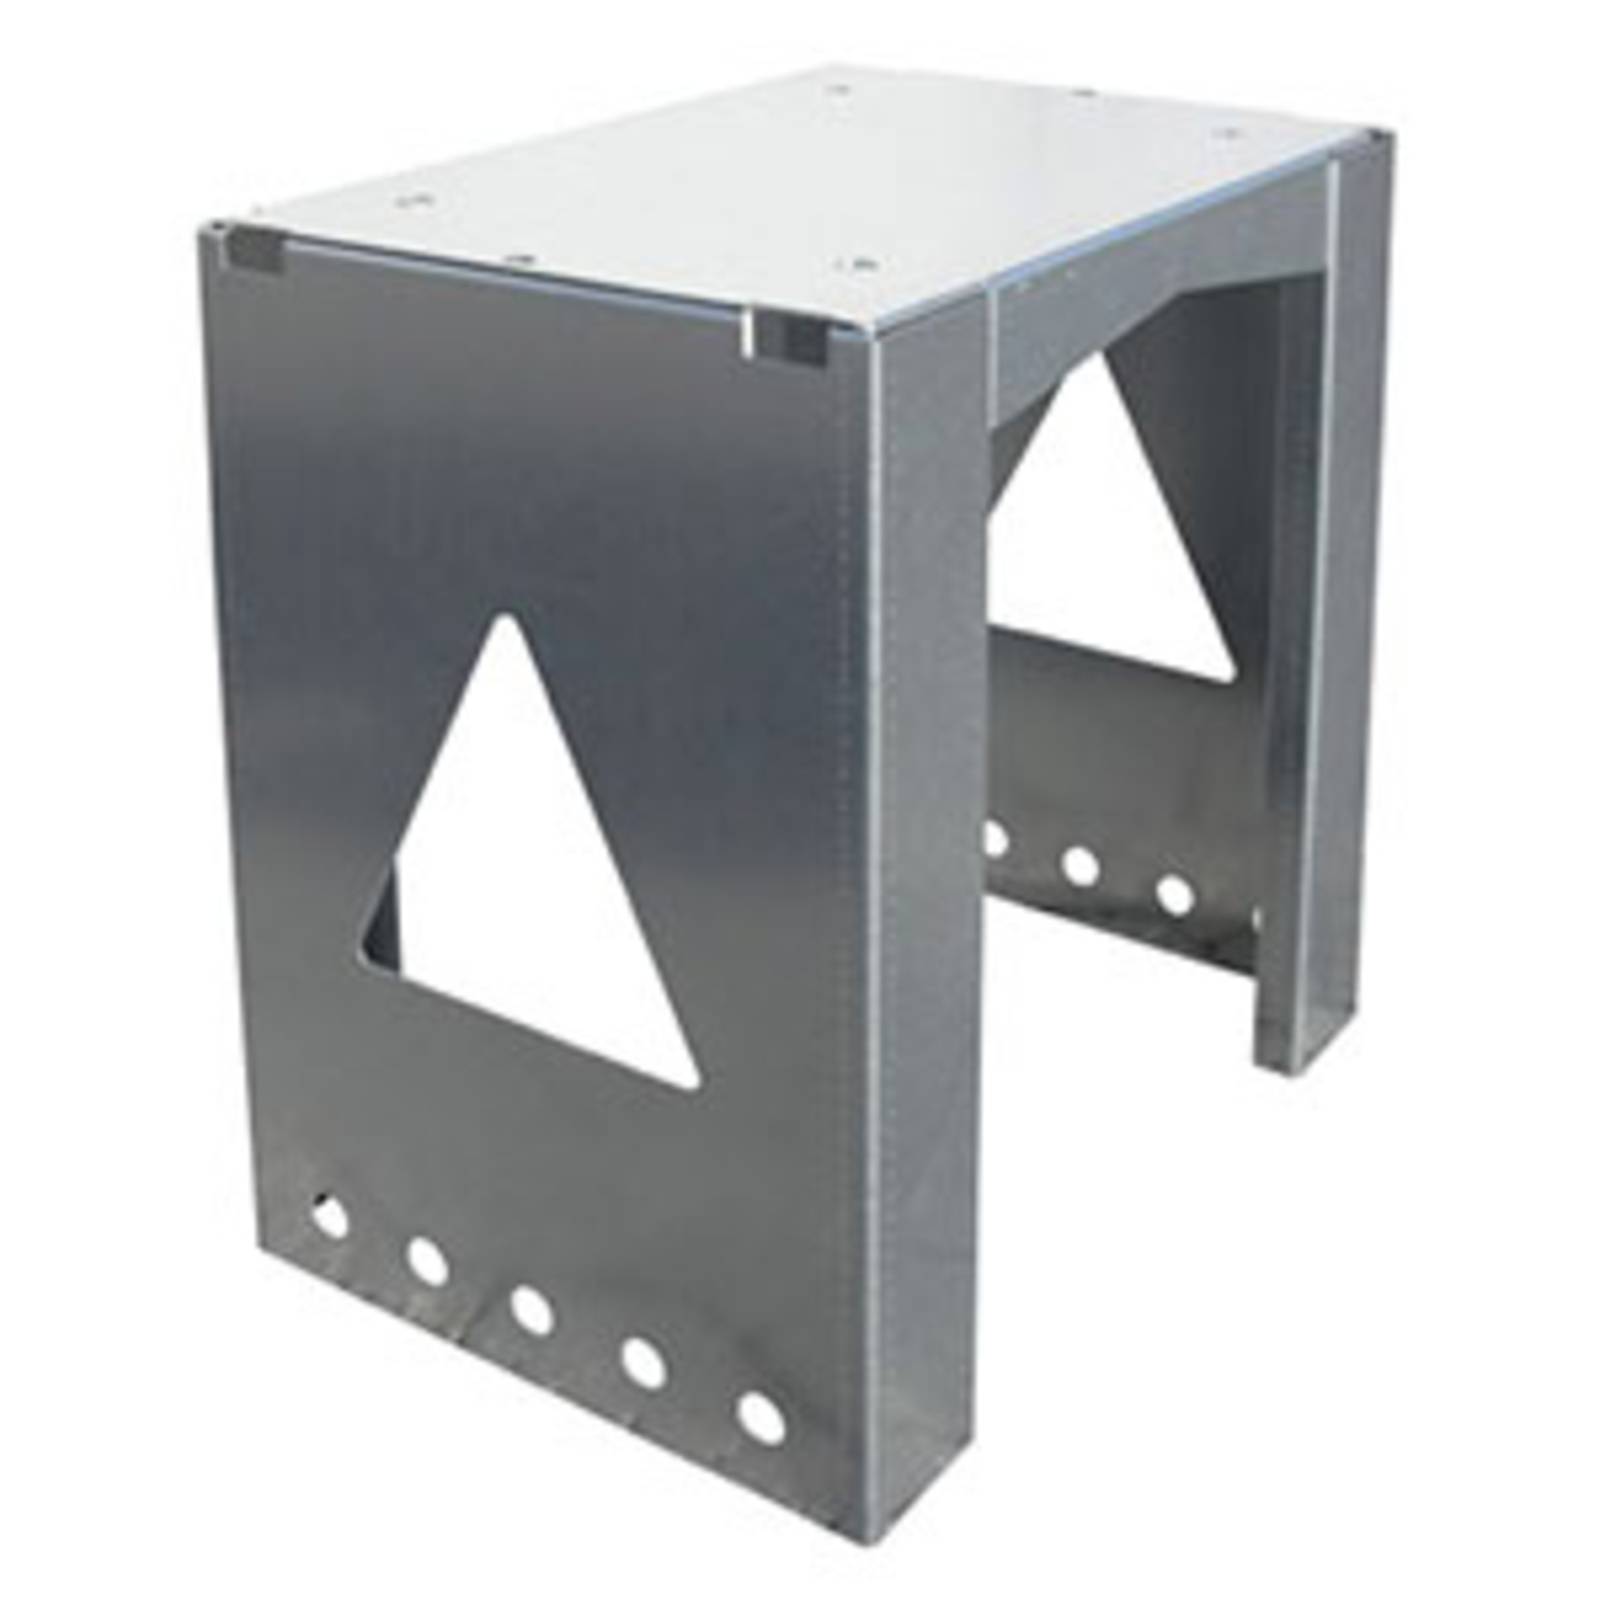 Versatile Stand 8002 letterbox stand, steel